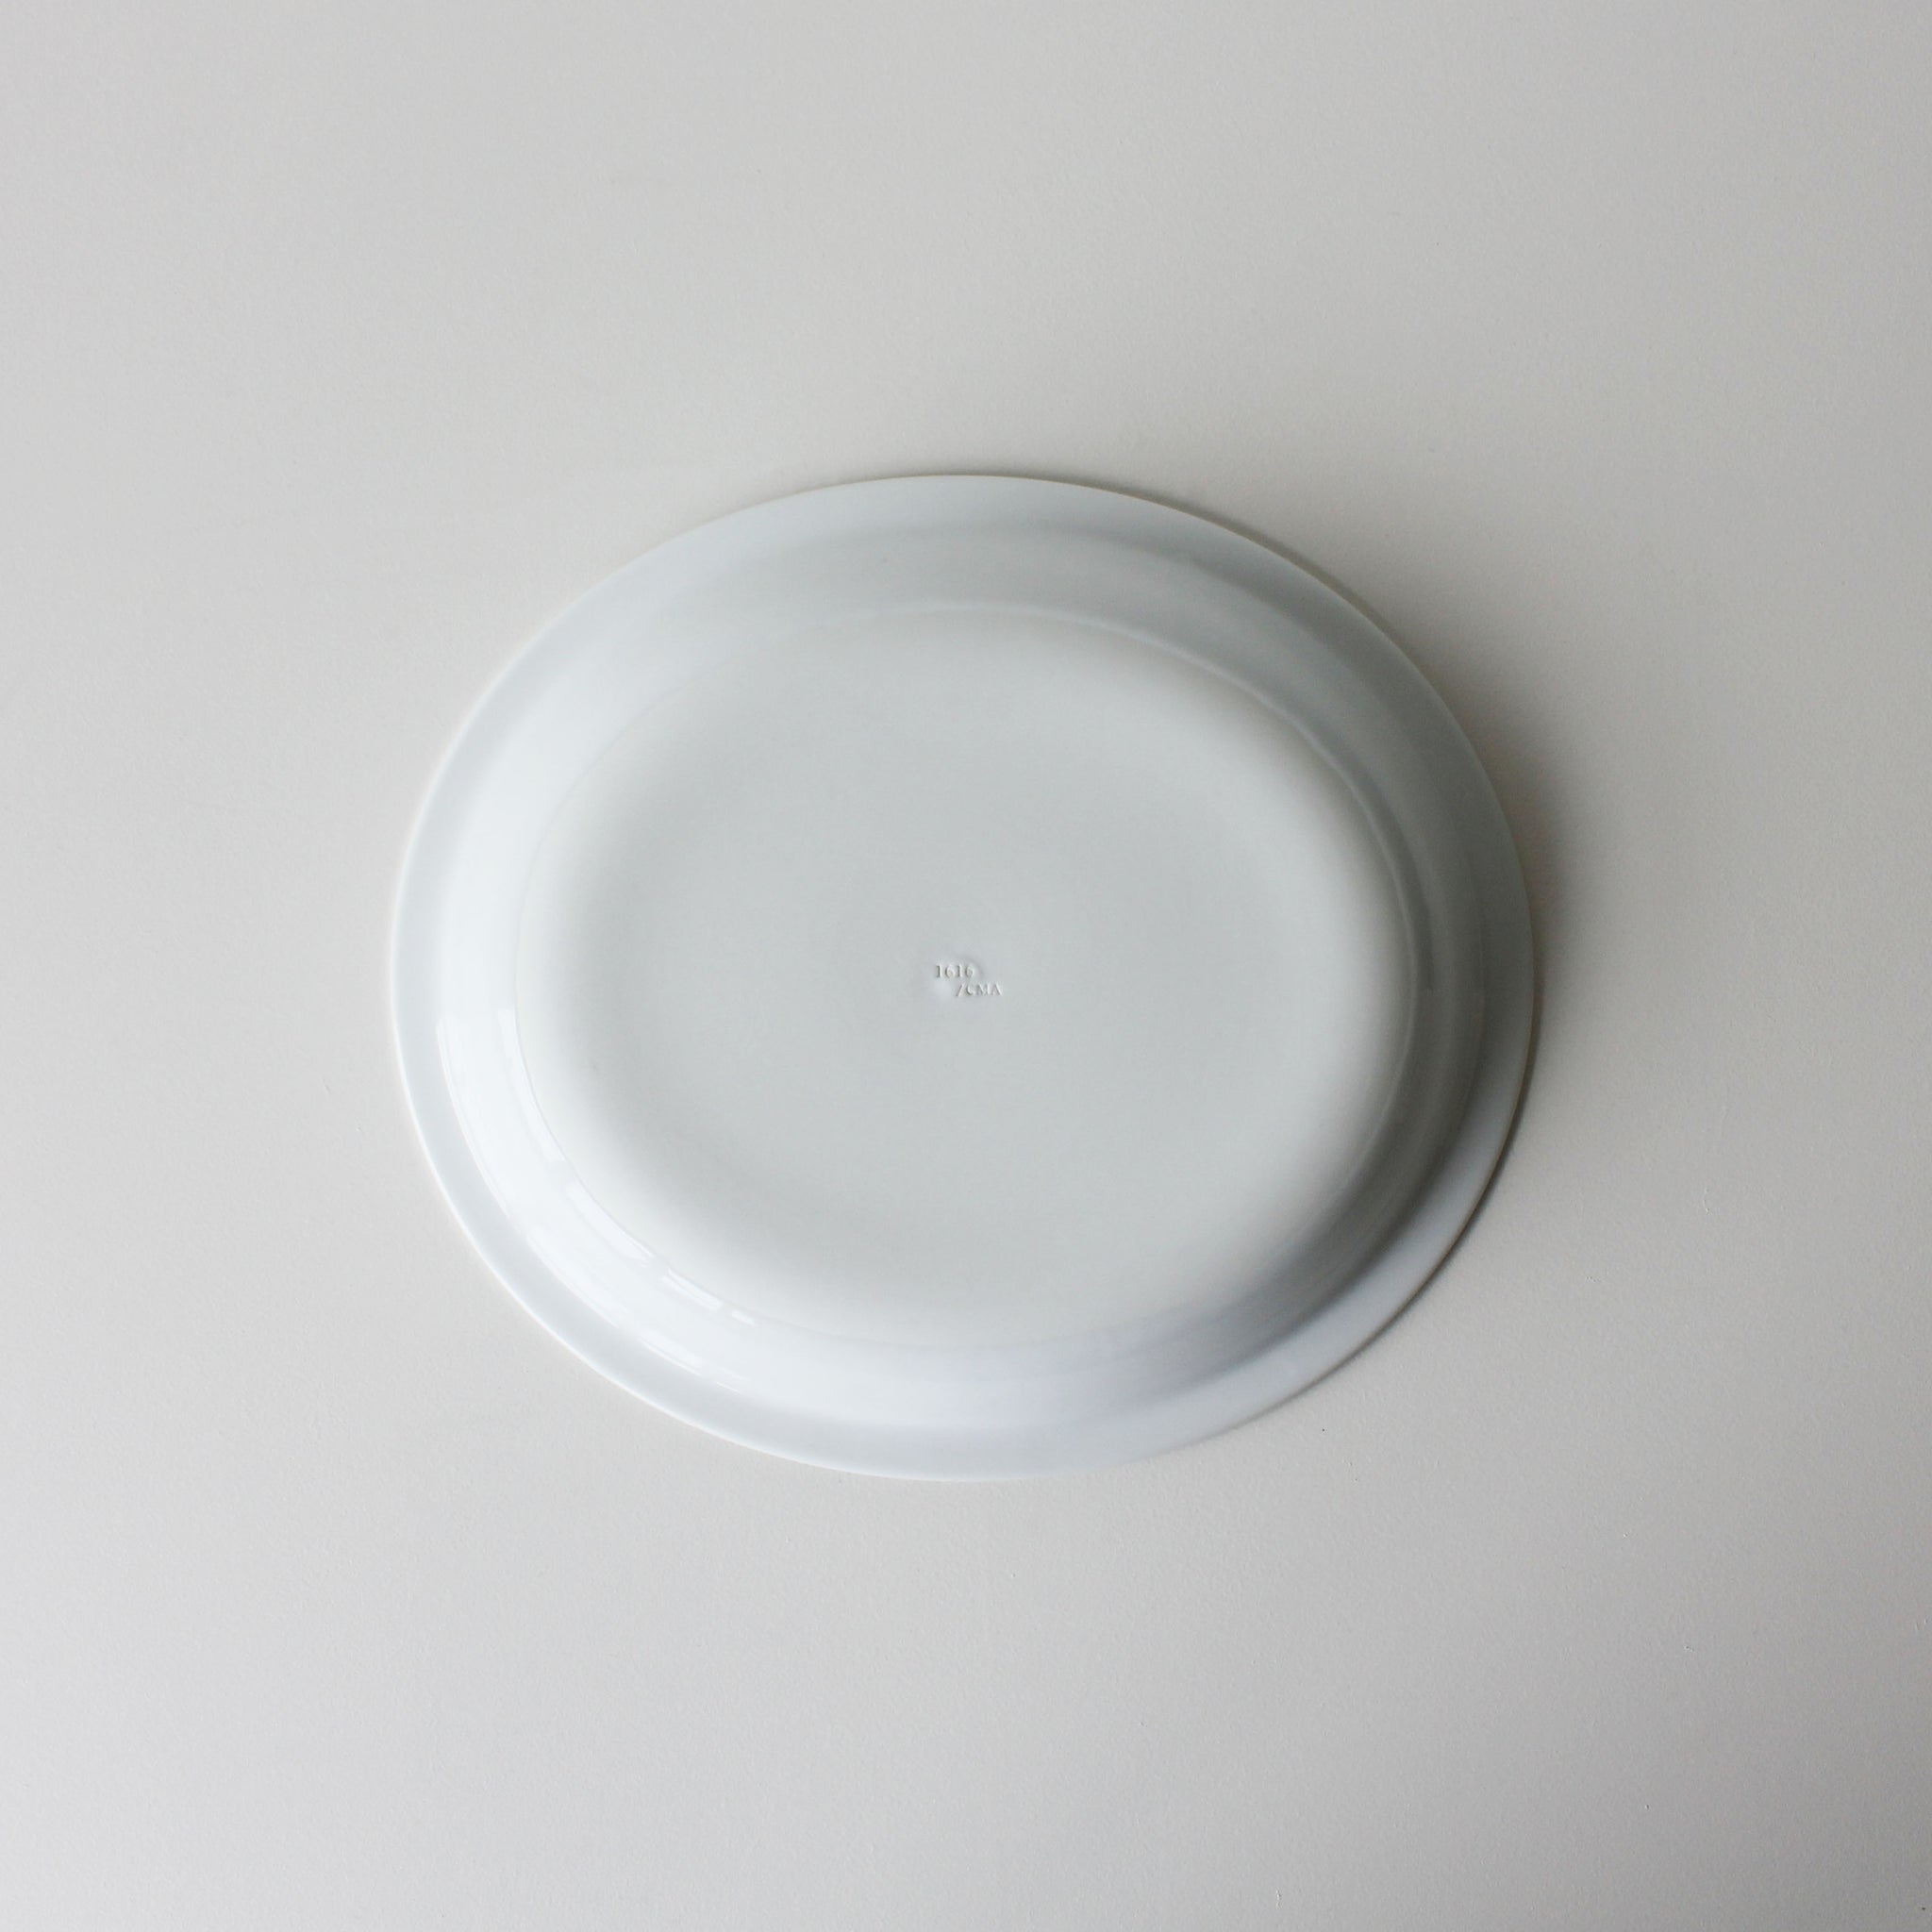 Oval Deep Bowl by Cecilie Manz